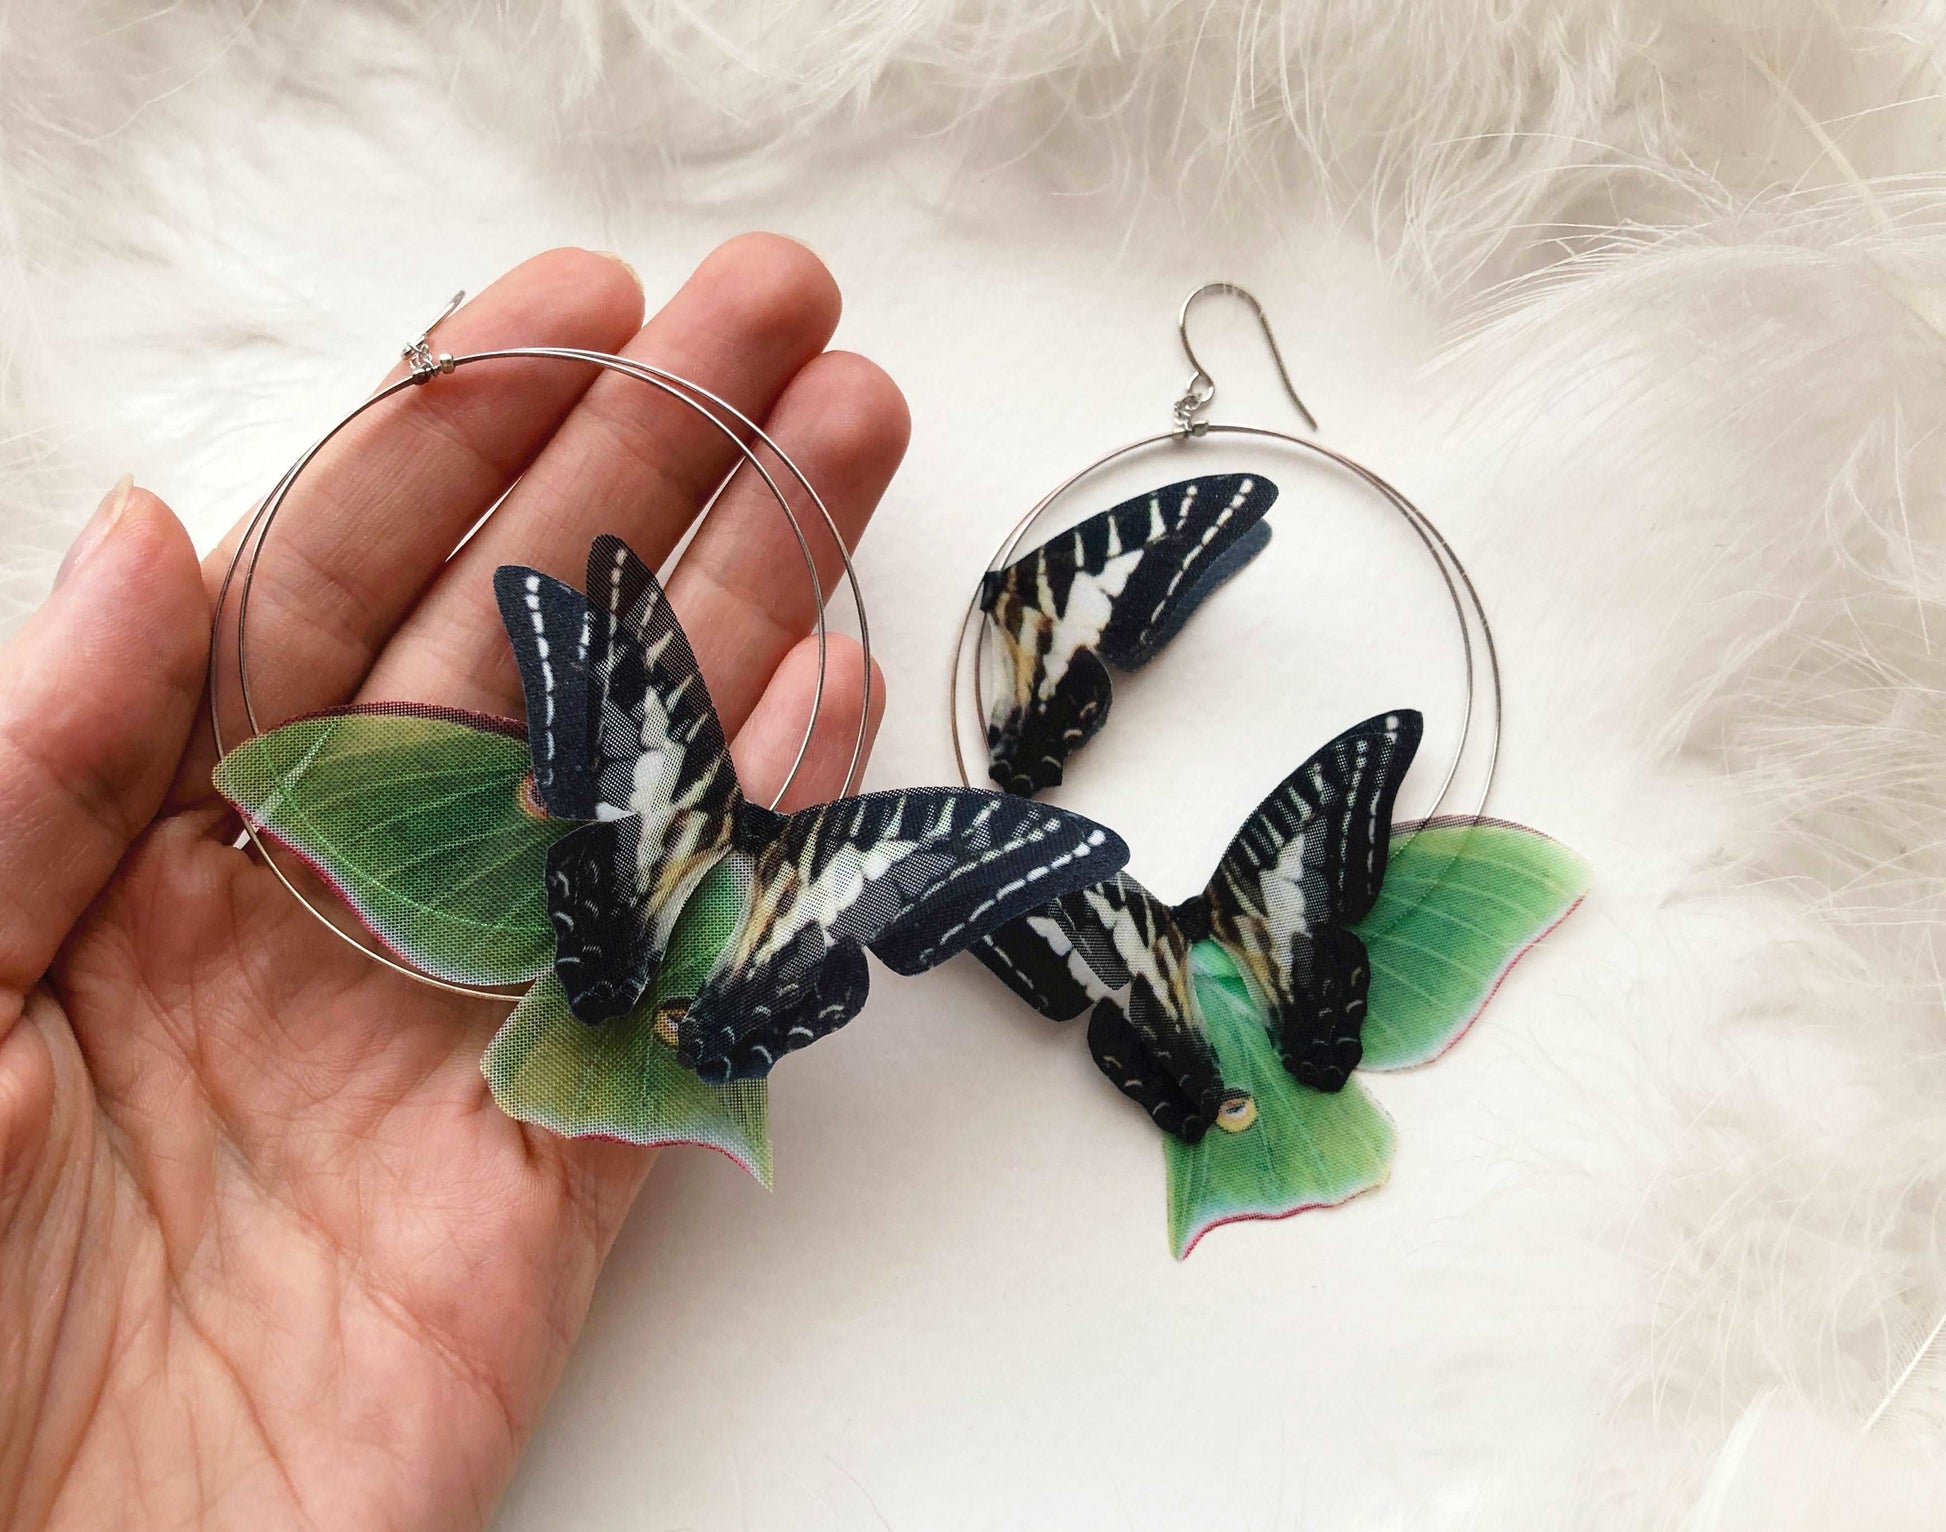 BoHo Style Luna Moth Earrings with Silver Hoops and Delicate Faux Moth Accents